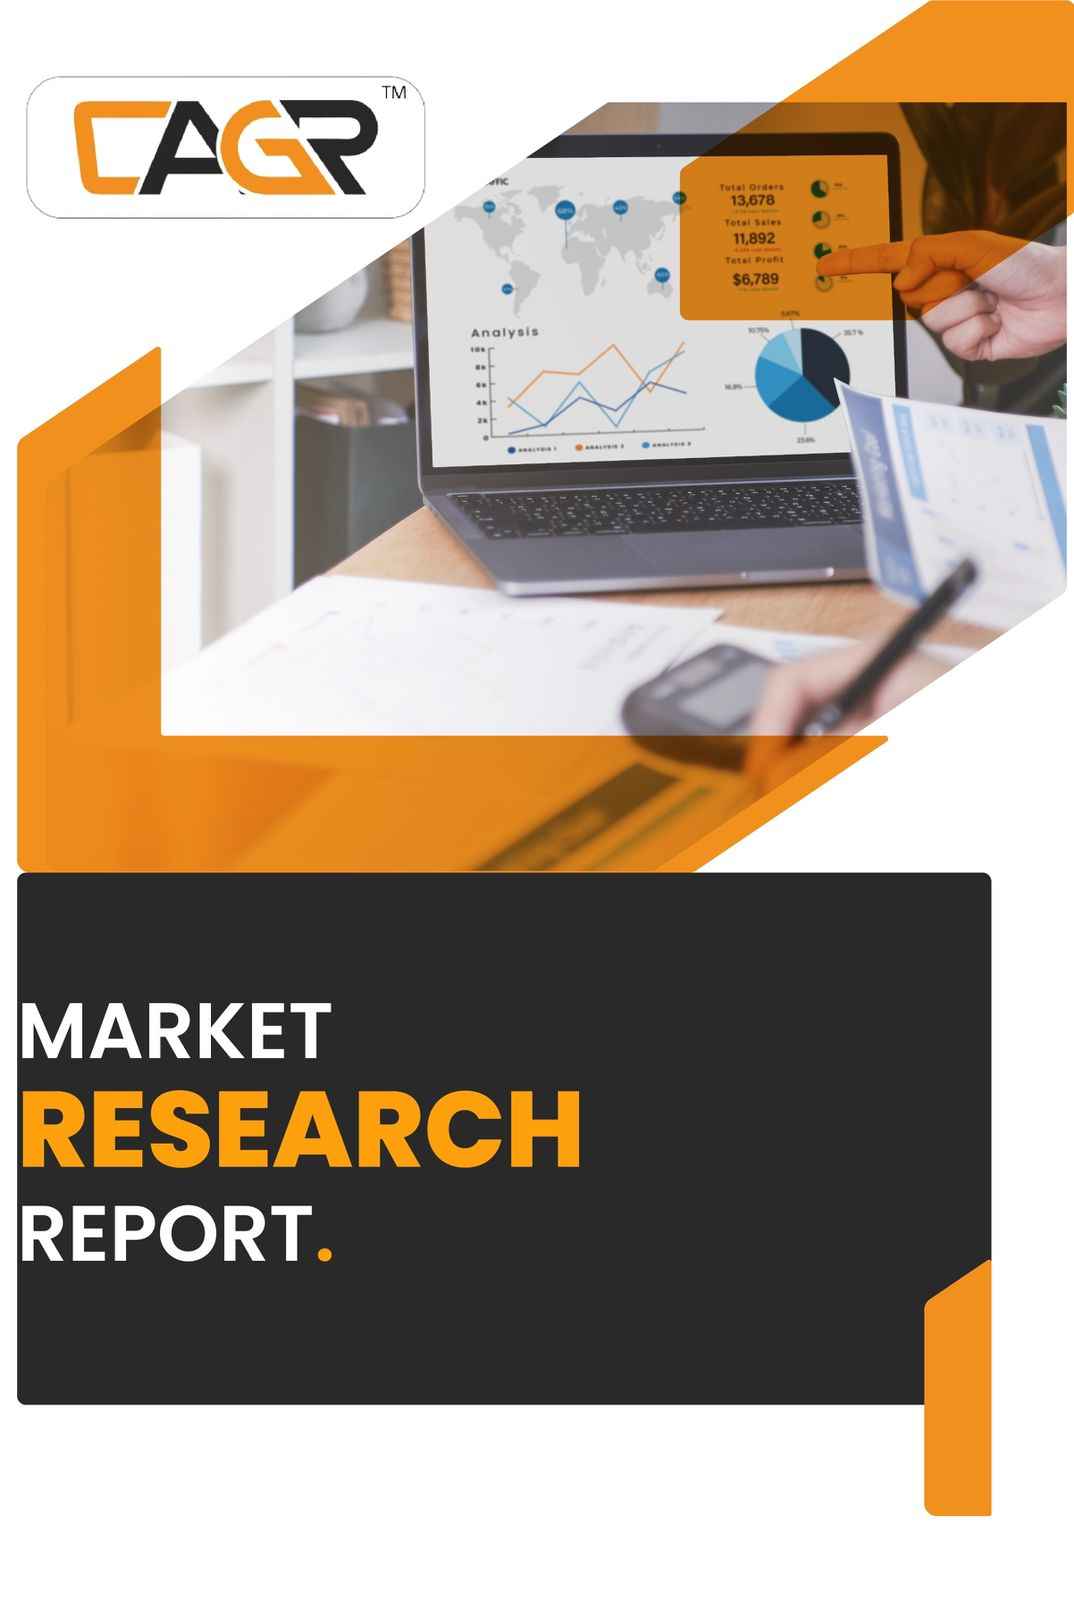 Global Advanced Packaging System Market Status, Trends and COVID-19 Impact Report 2022